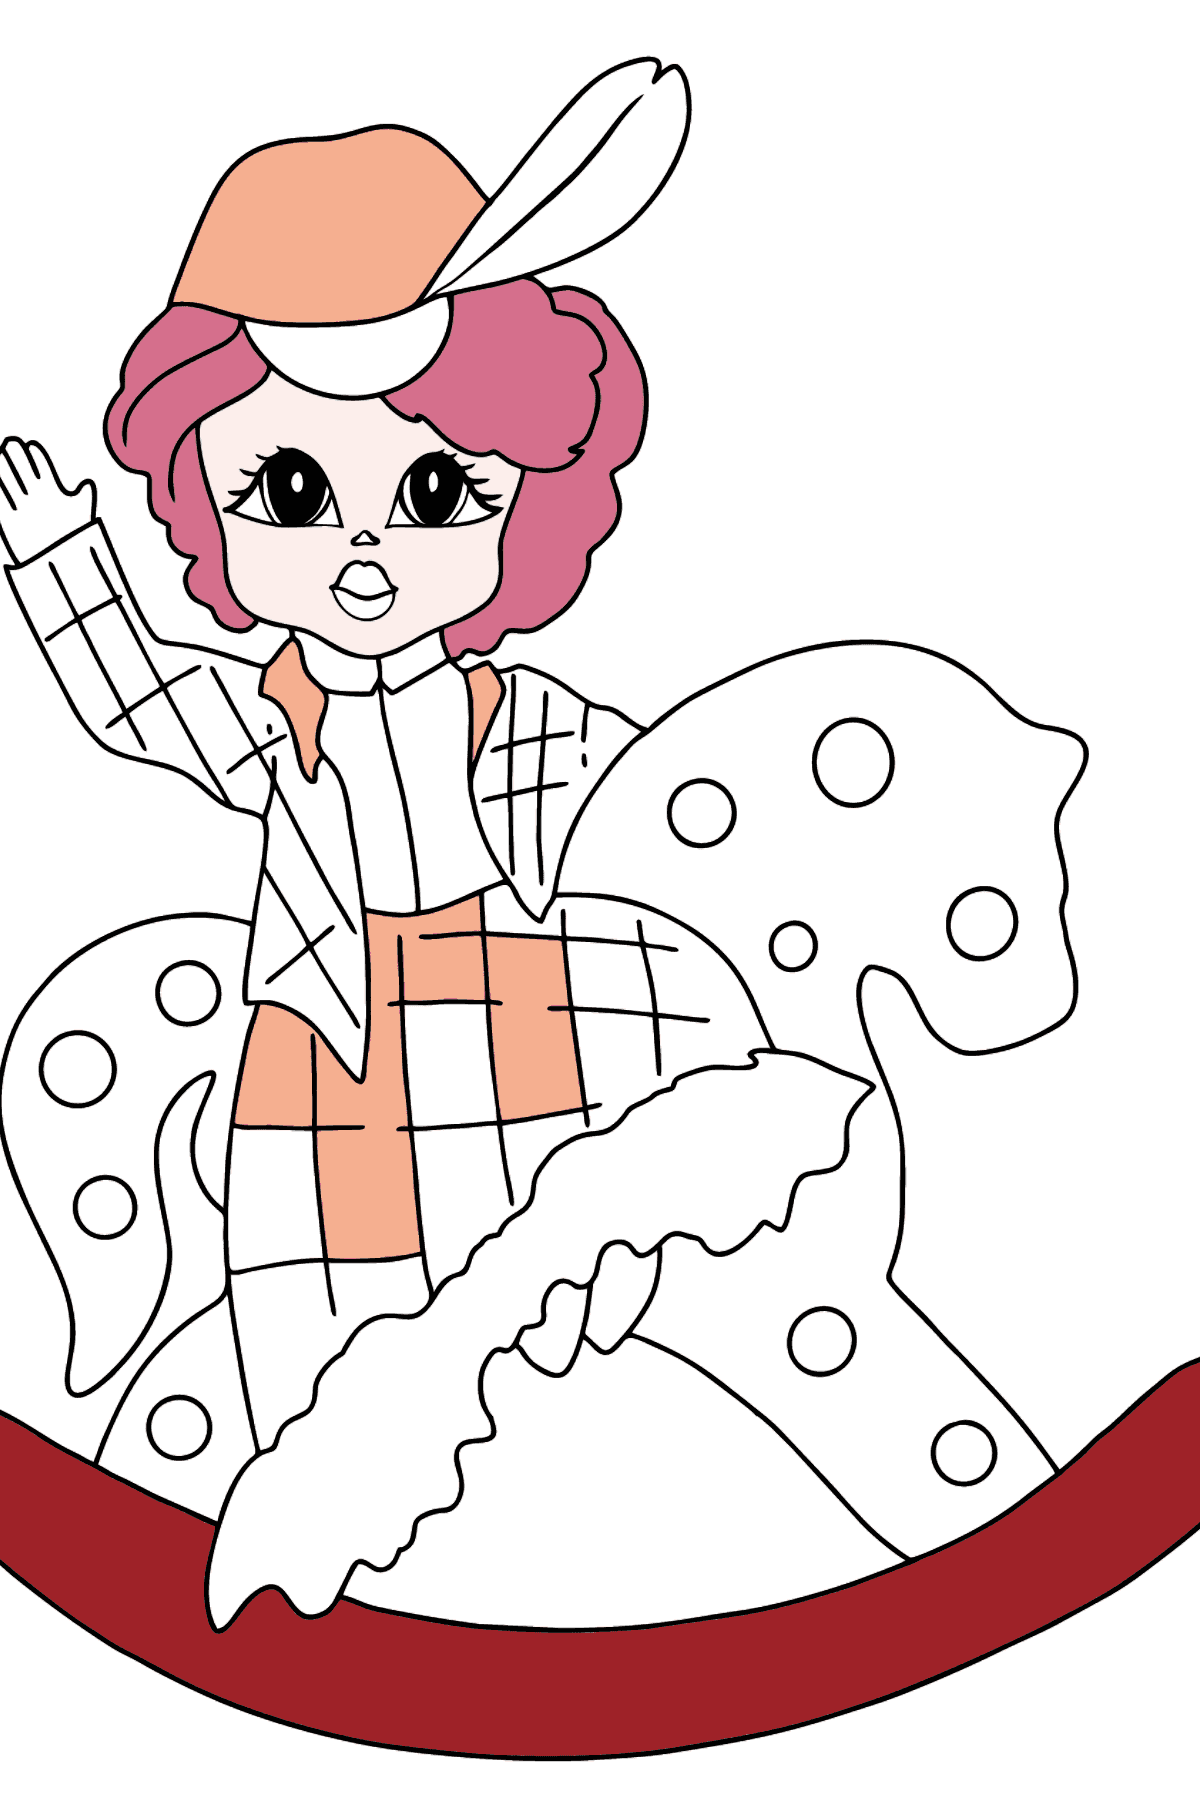 Coloring Page - A Princess on a Horse - For Girls - Coloring Pages for Kids